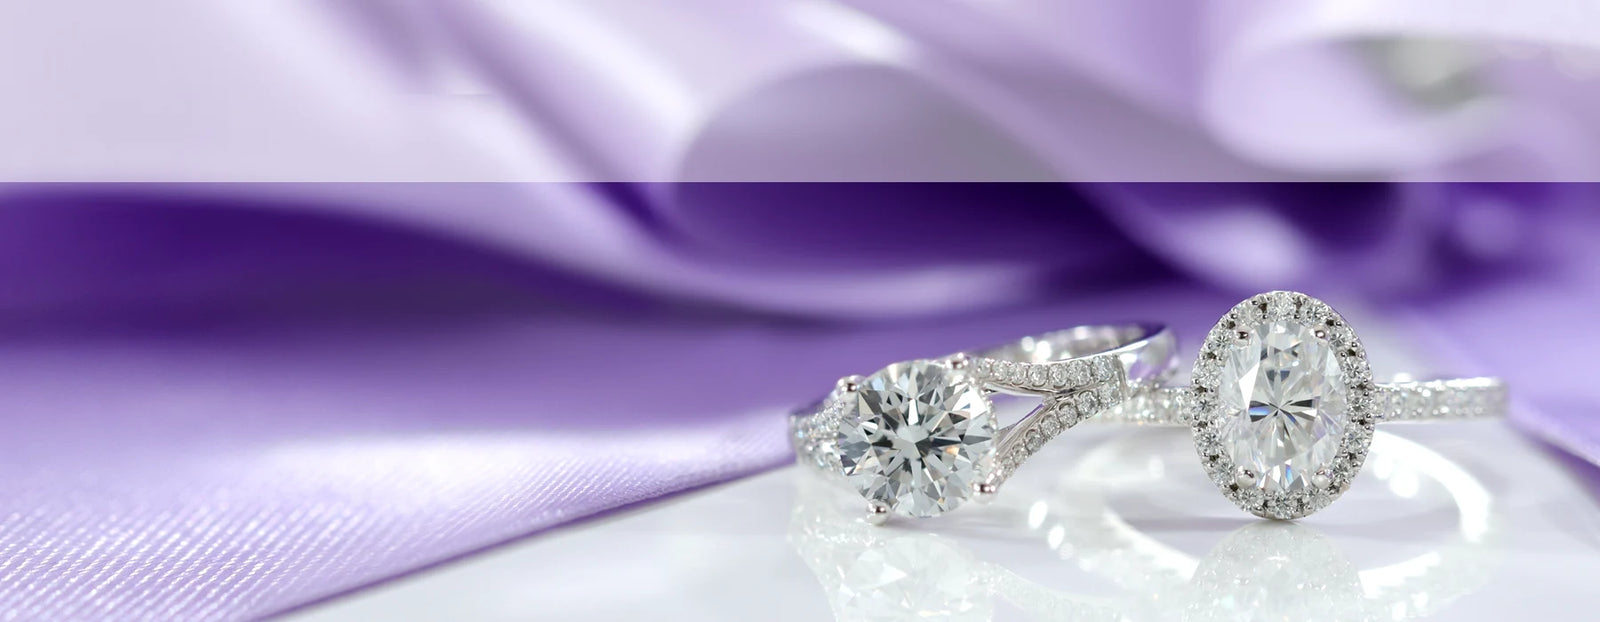 shop affordable engagement rings with lab diamonds in Canada at Quorri